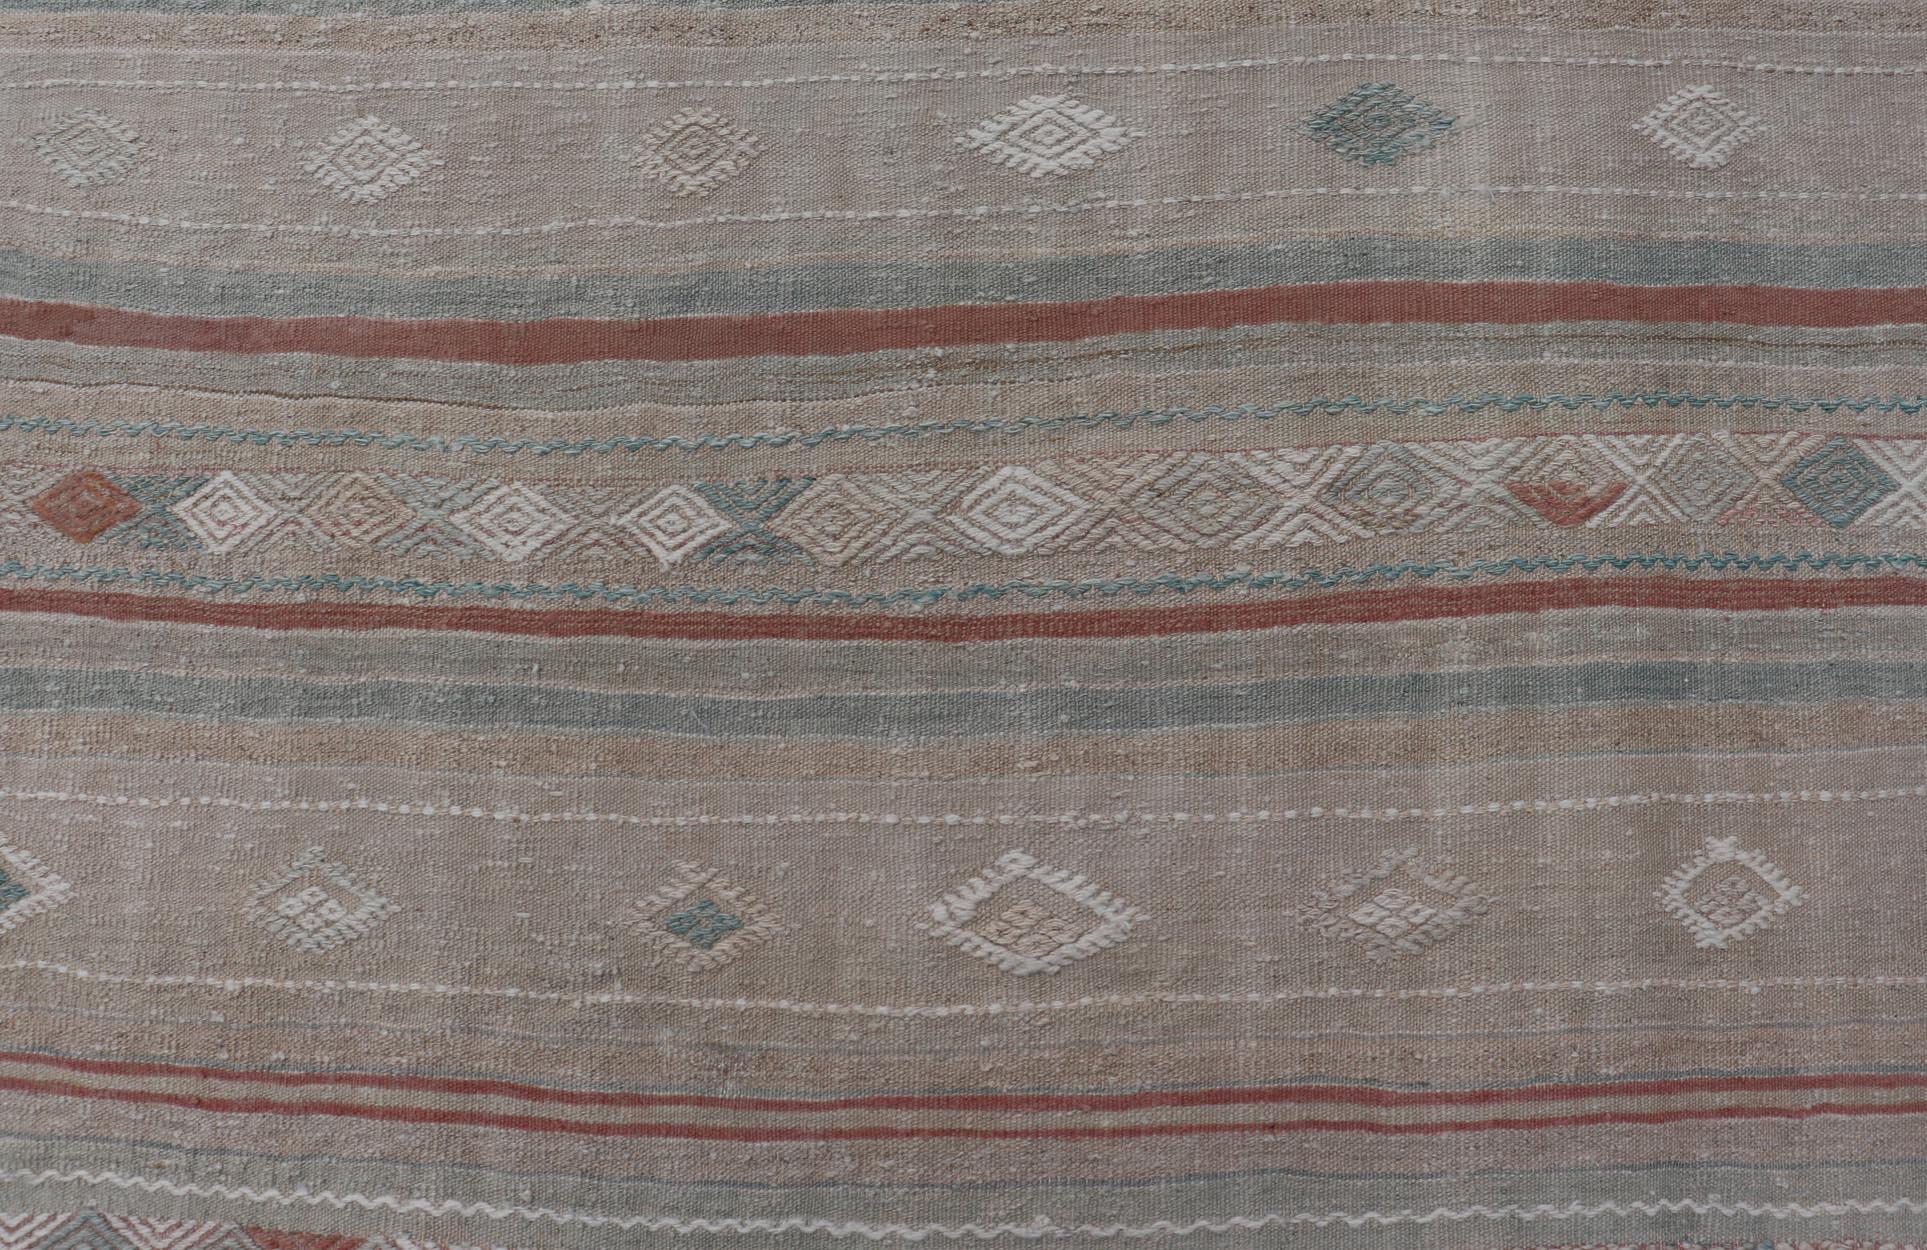 Wool Turkish Flat-Weave Embroideries Kilim in Taupe, Green, Teal, Cream, and Brown For Sale